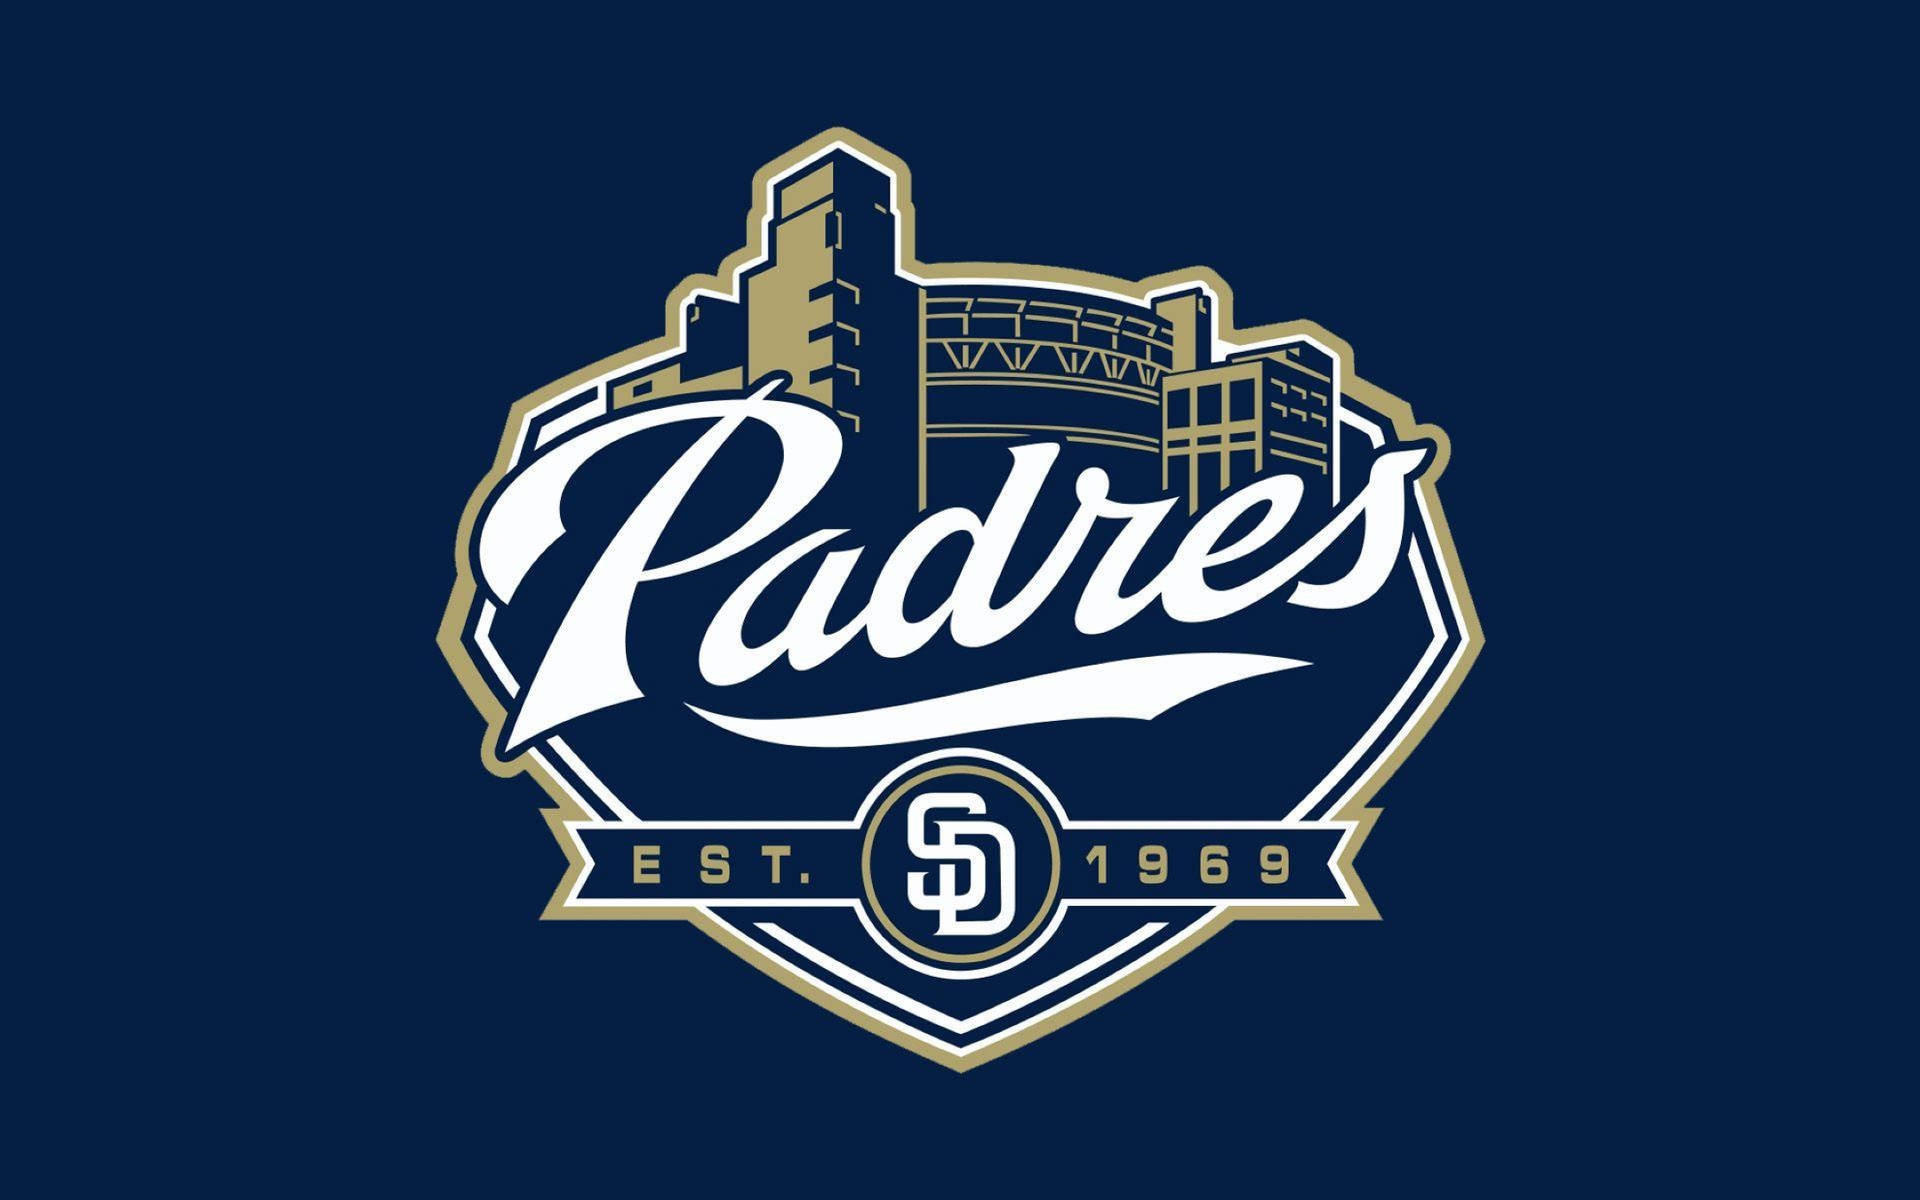 SAN DIEGO PADRES - Wallpaper for cell phone + computer - LOGOWORLD